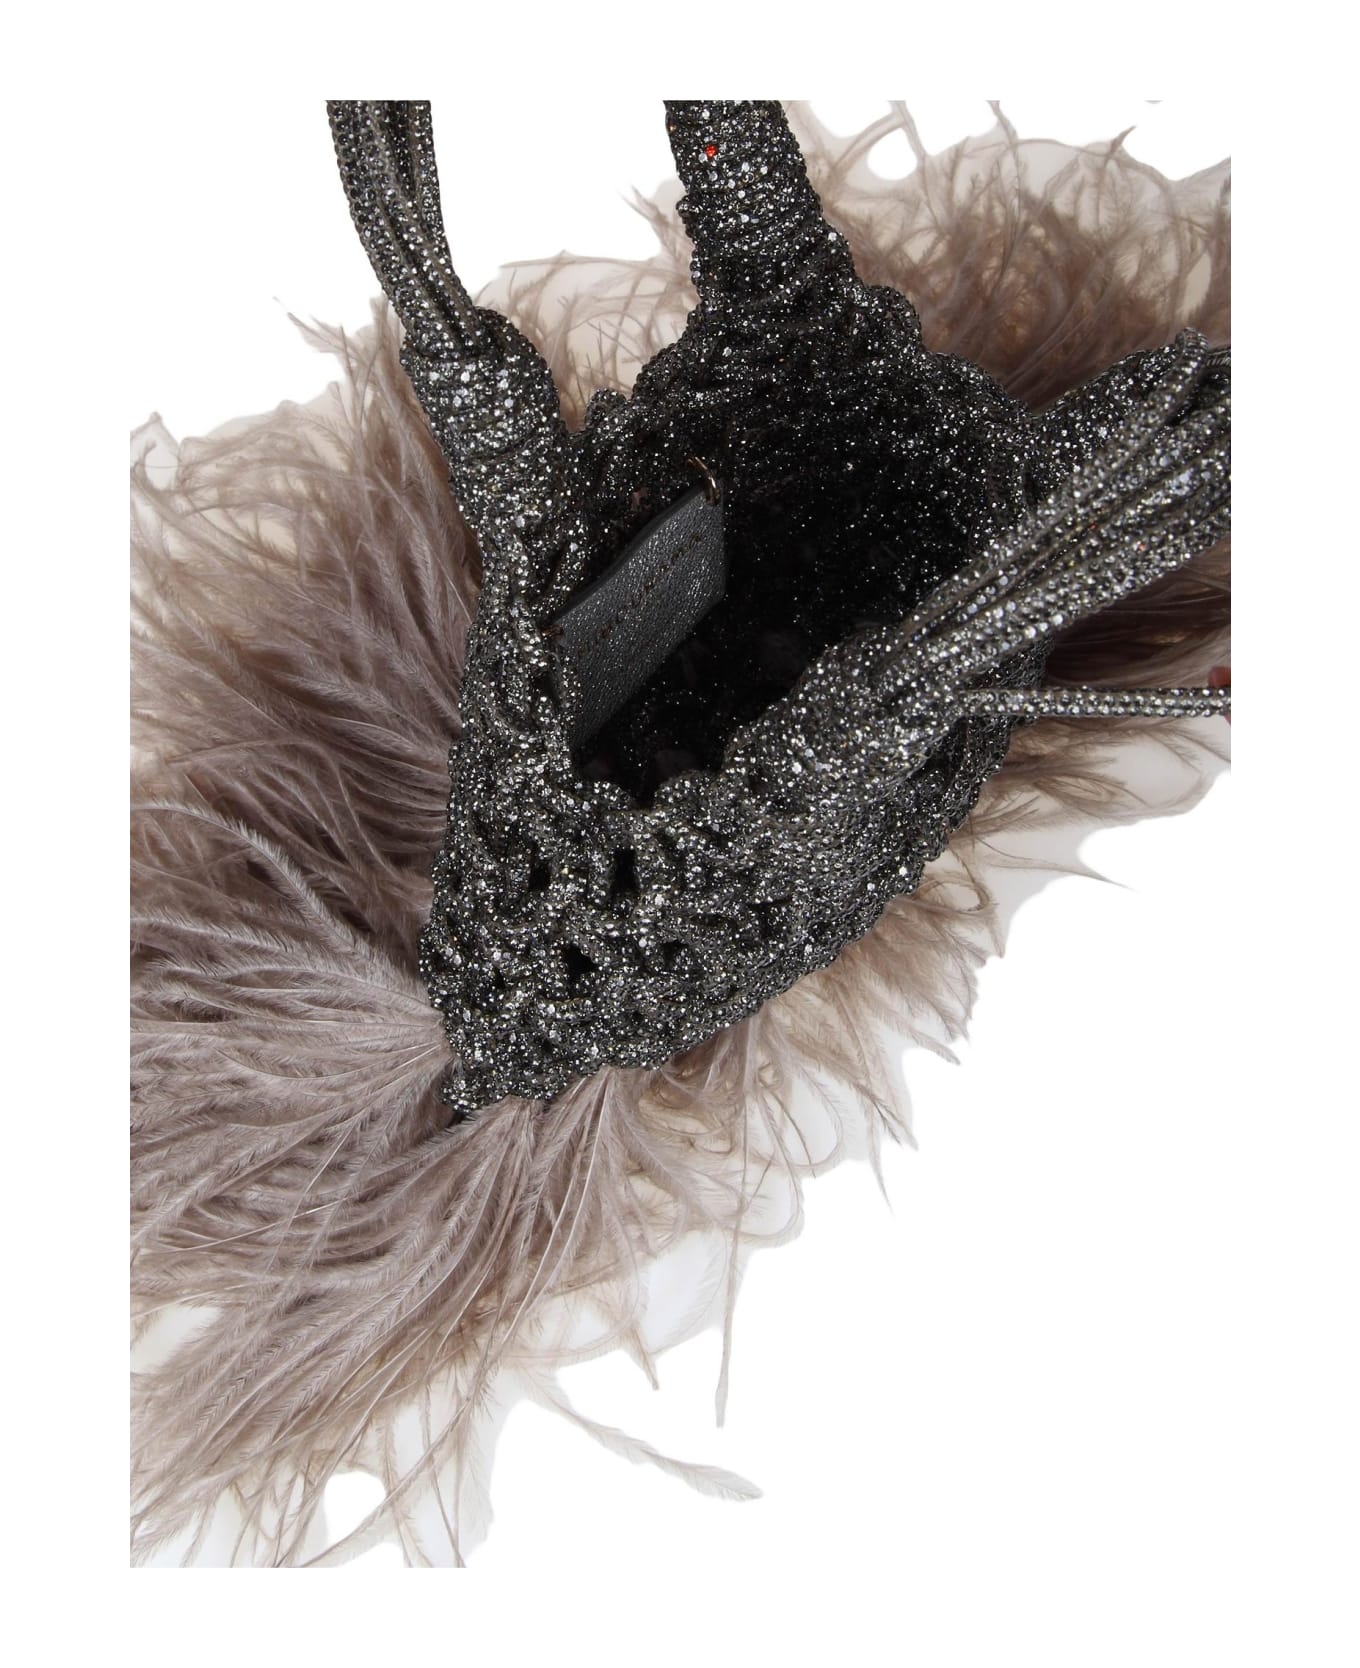 Hibourama Jewel Bag Woven With Ostrich Feathers - Black トートバッグ